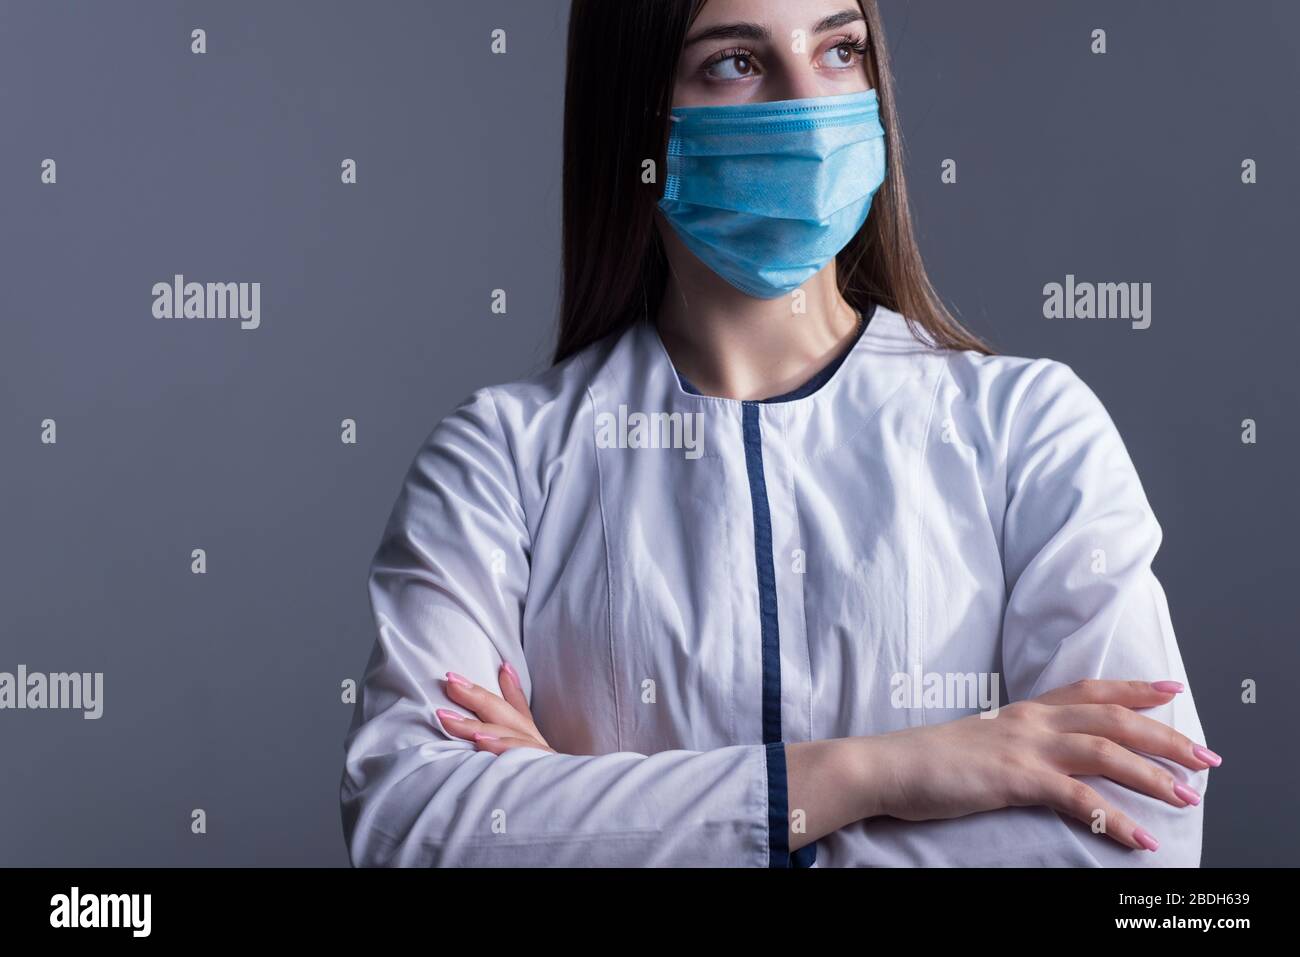 Closeup portrait of a young girl. doctor in a white coat, and a medical mask. looking at the camera. Studio photo on a gray background. Precautions wh Stock Photo